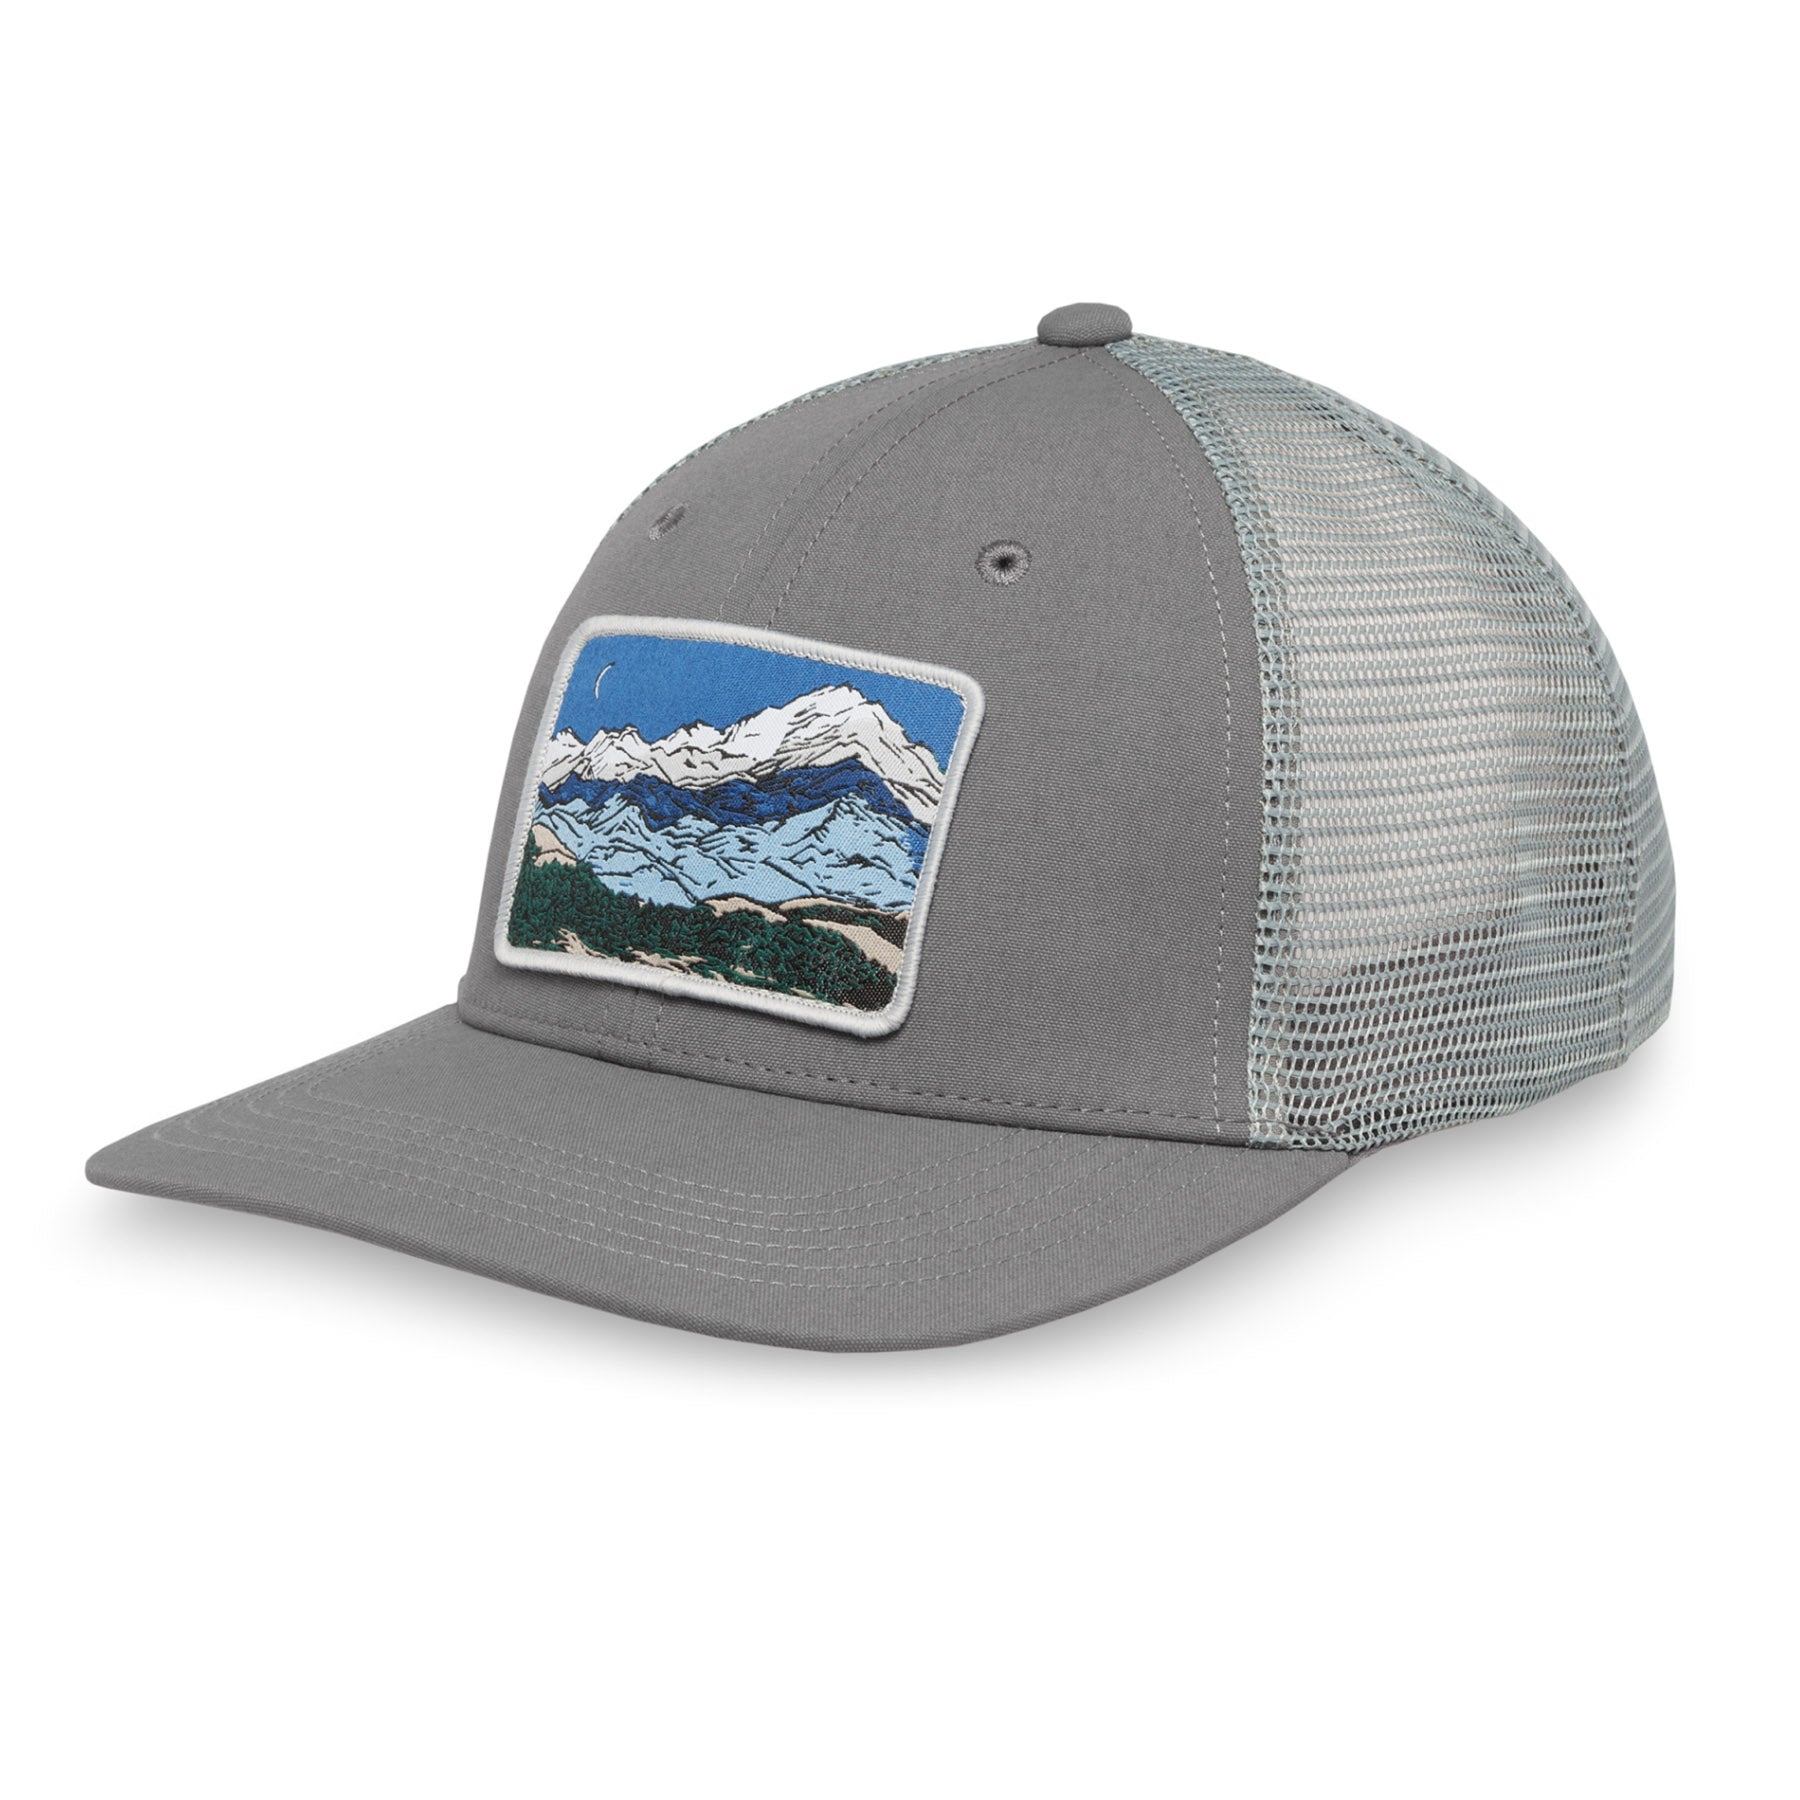 Sunday Afternoons Artist Patch Trucker